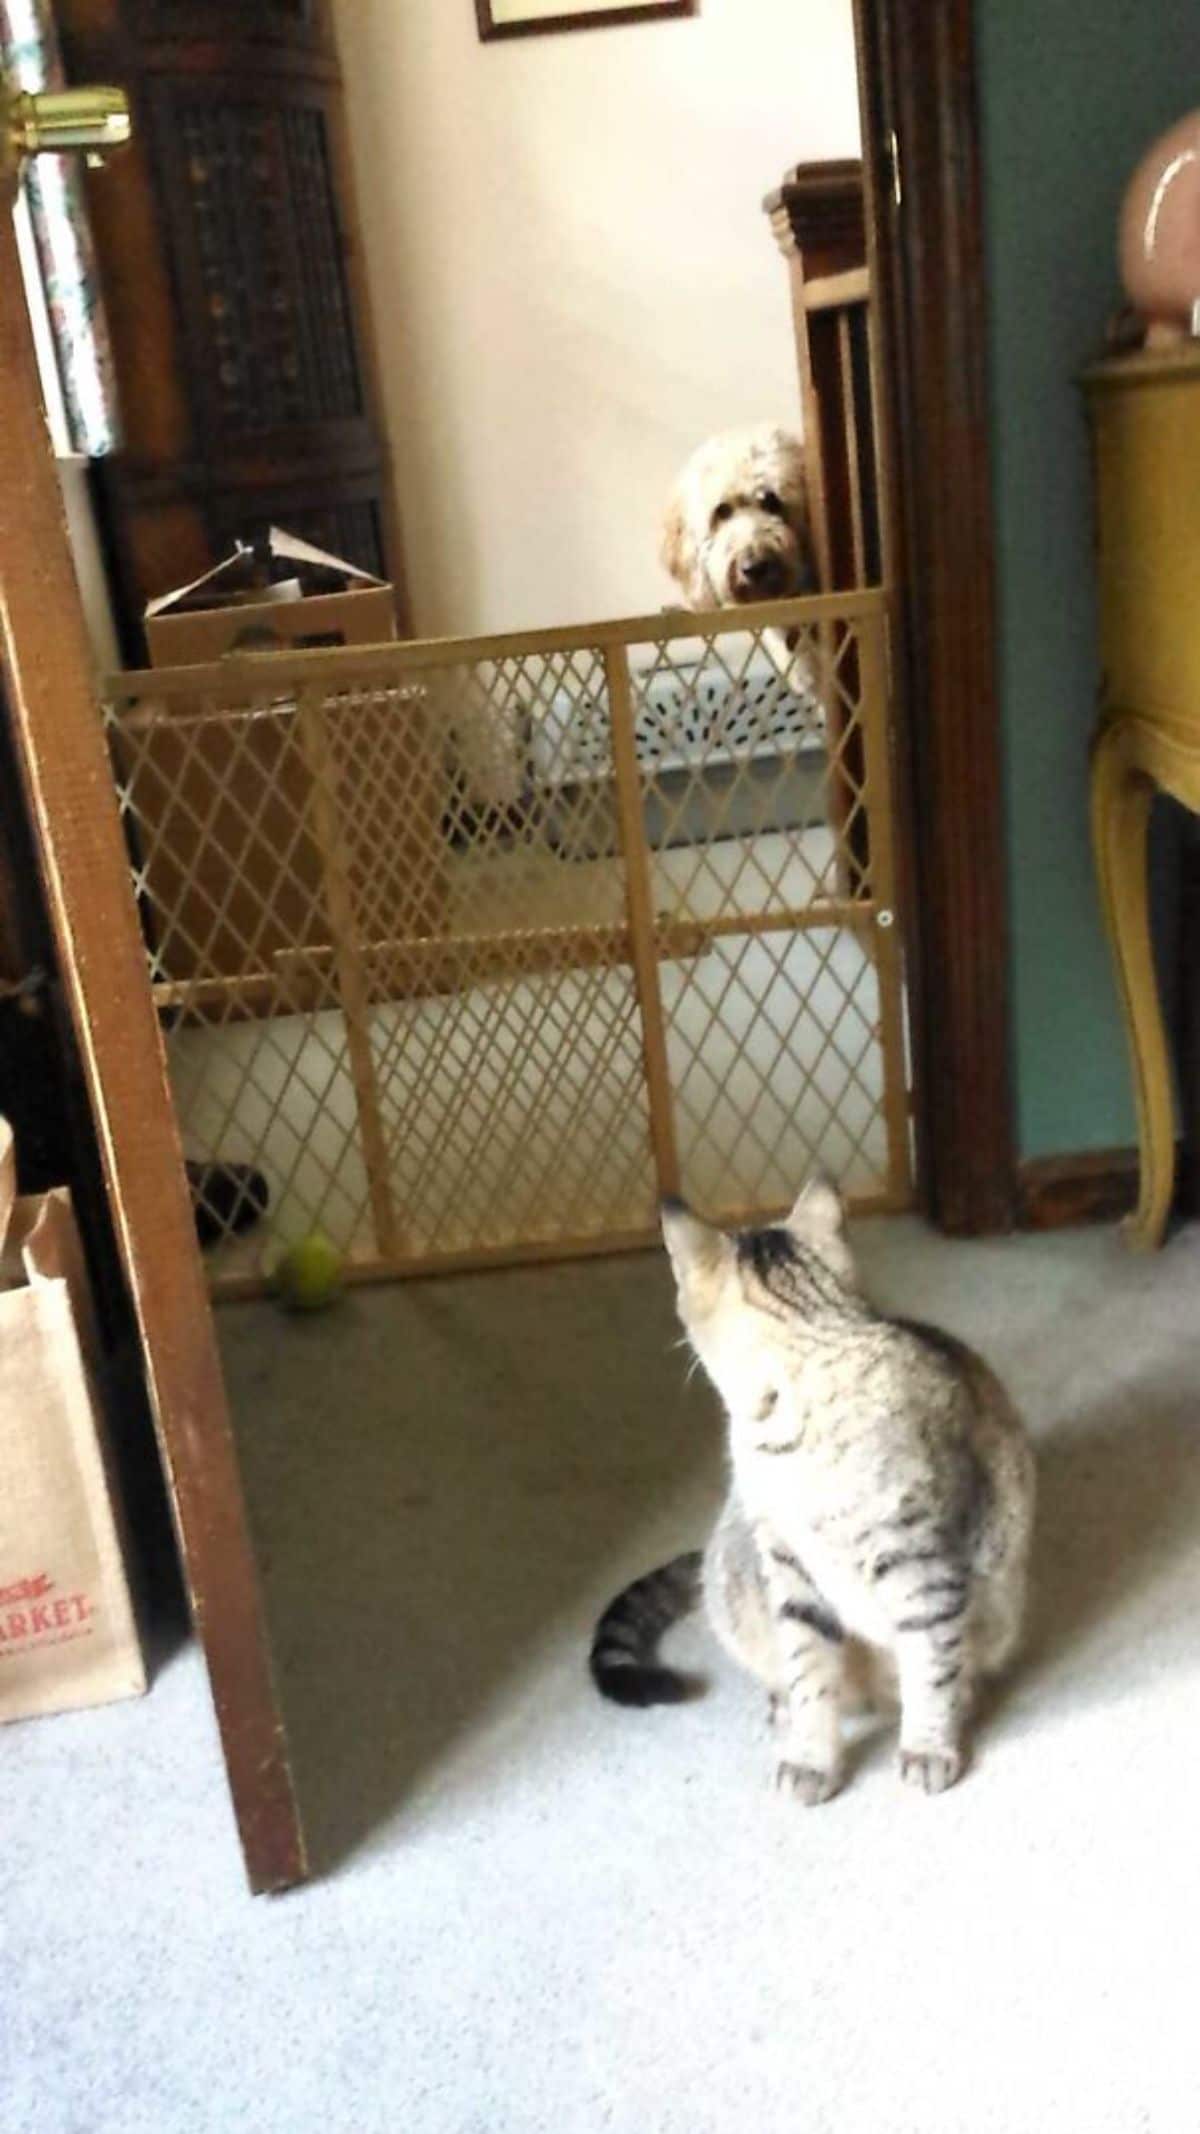 white poodle peeking around a corner at a grey tabby cat turning to look at the dog